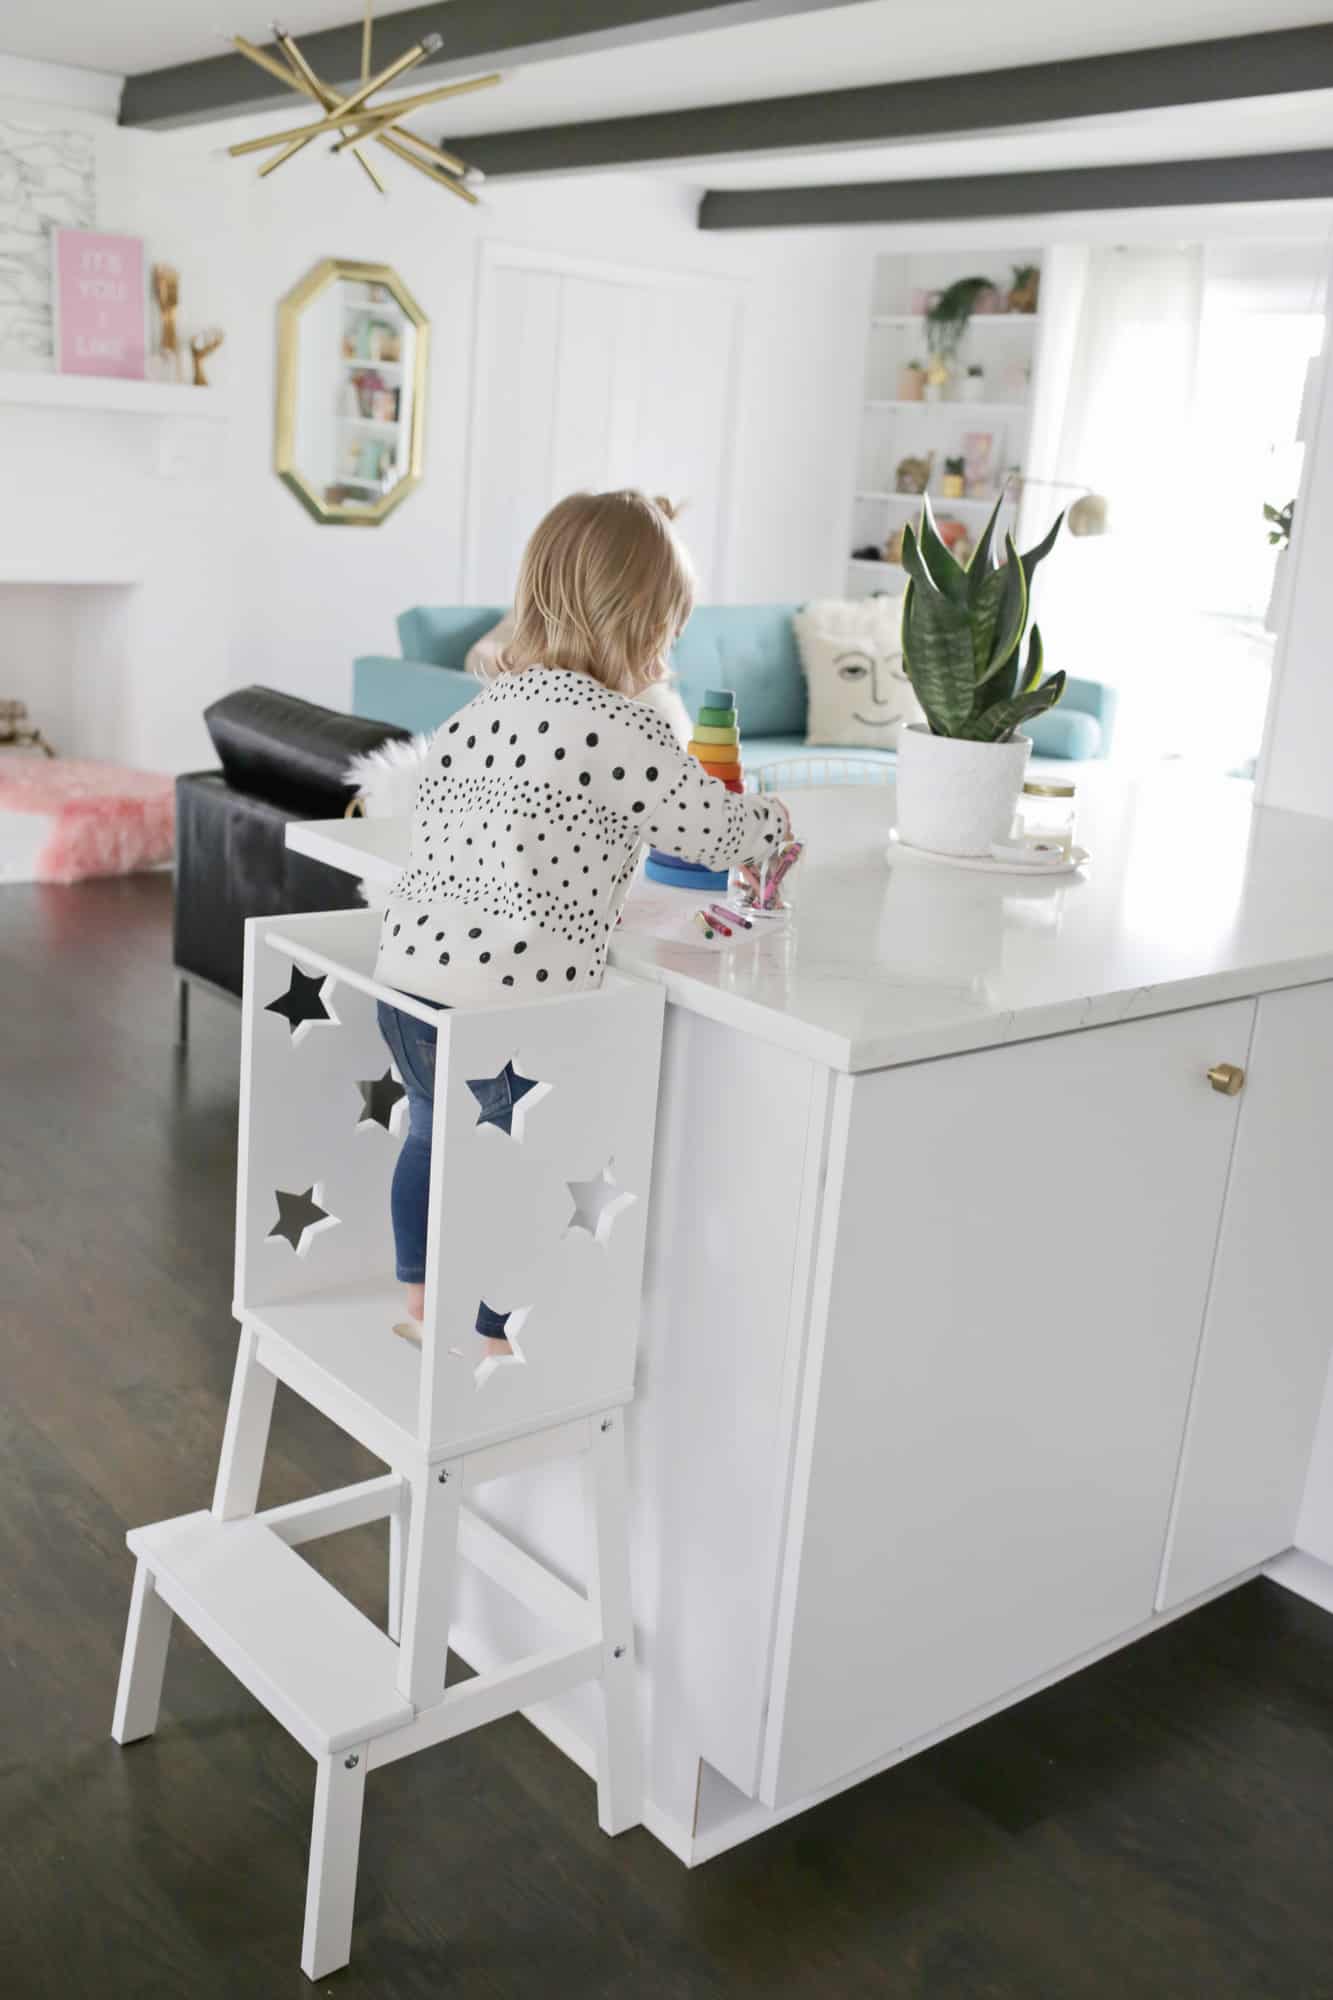 toddler standing on star step stool playing with toys on a kitchen counter